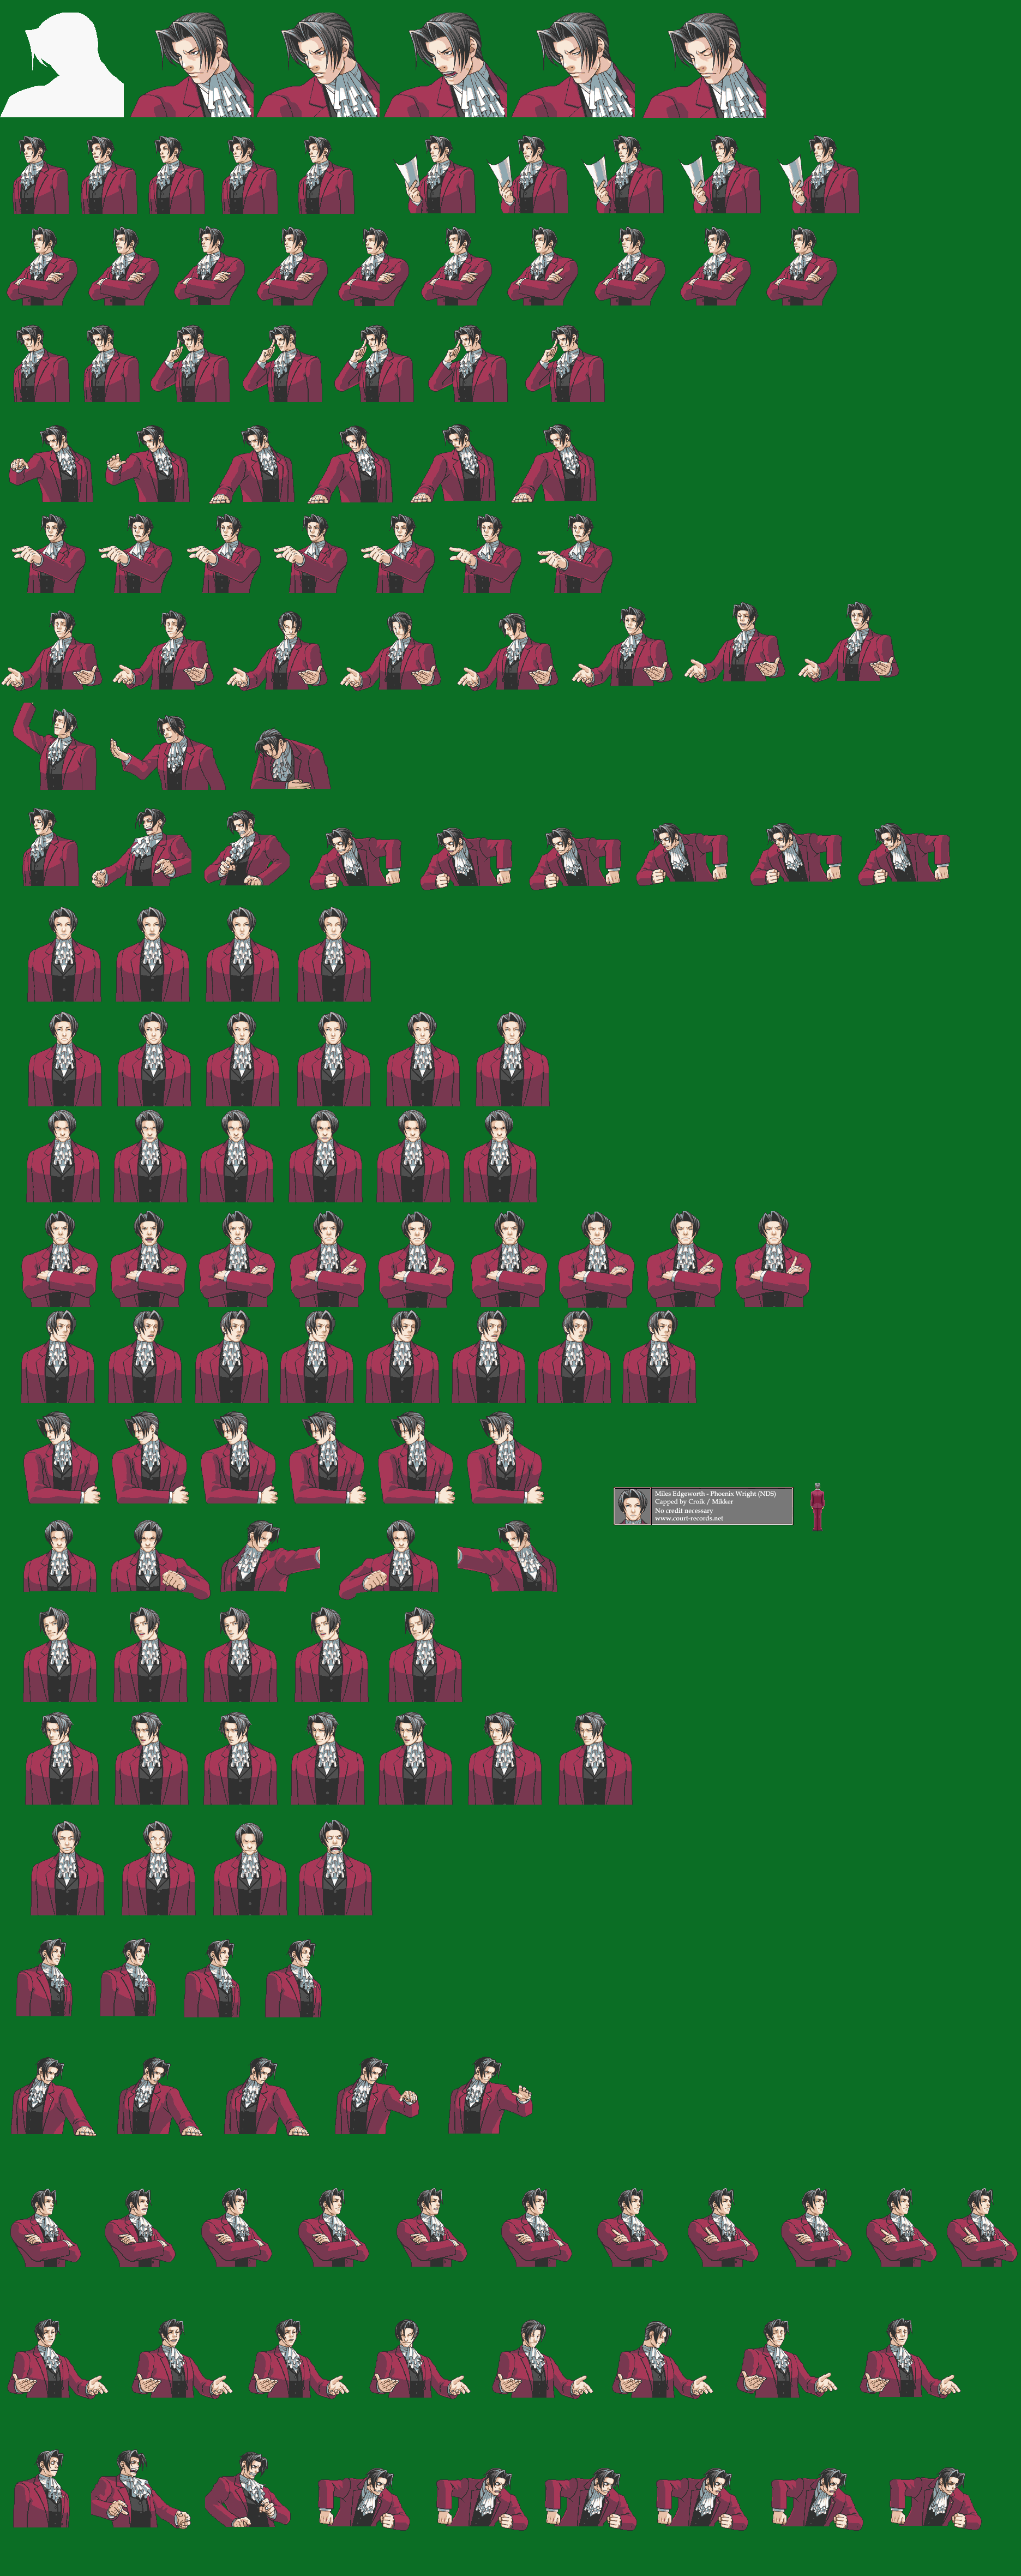 Here's Miles' sprite sheet. 